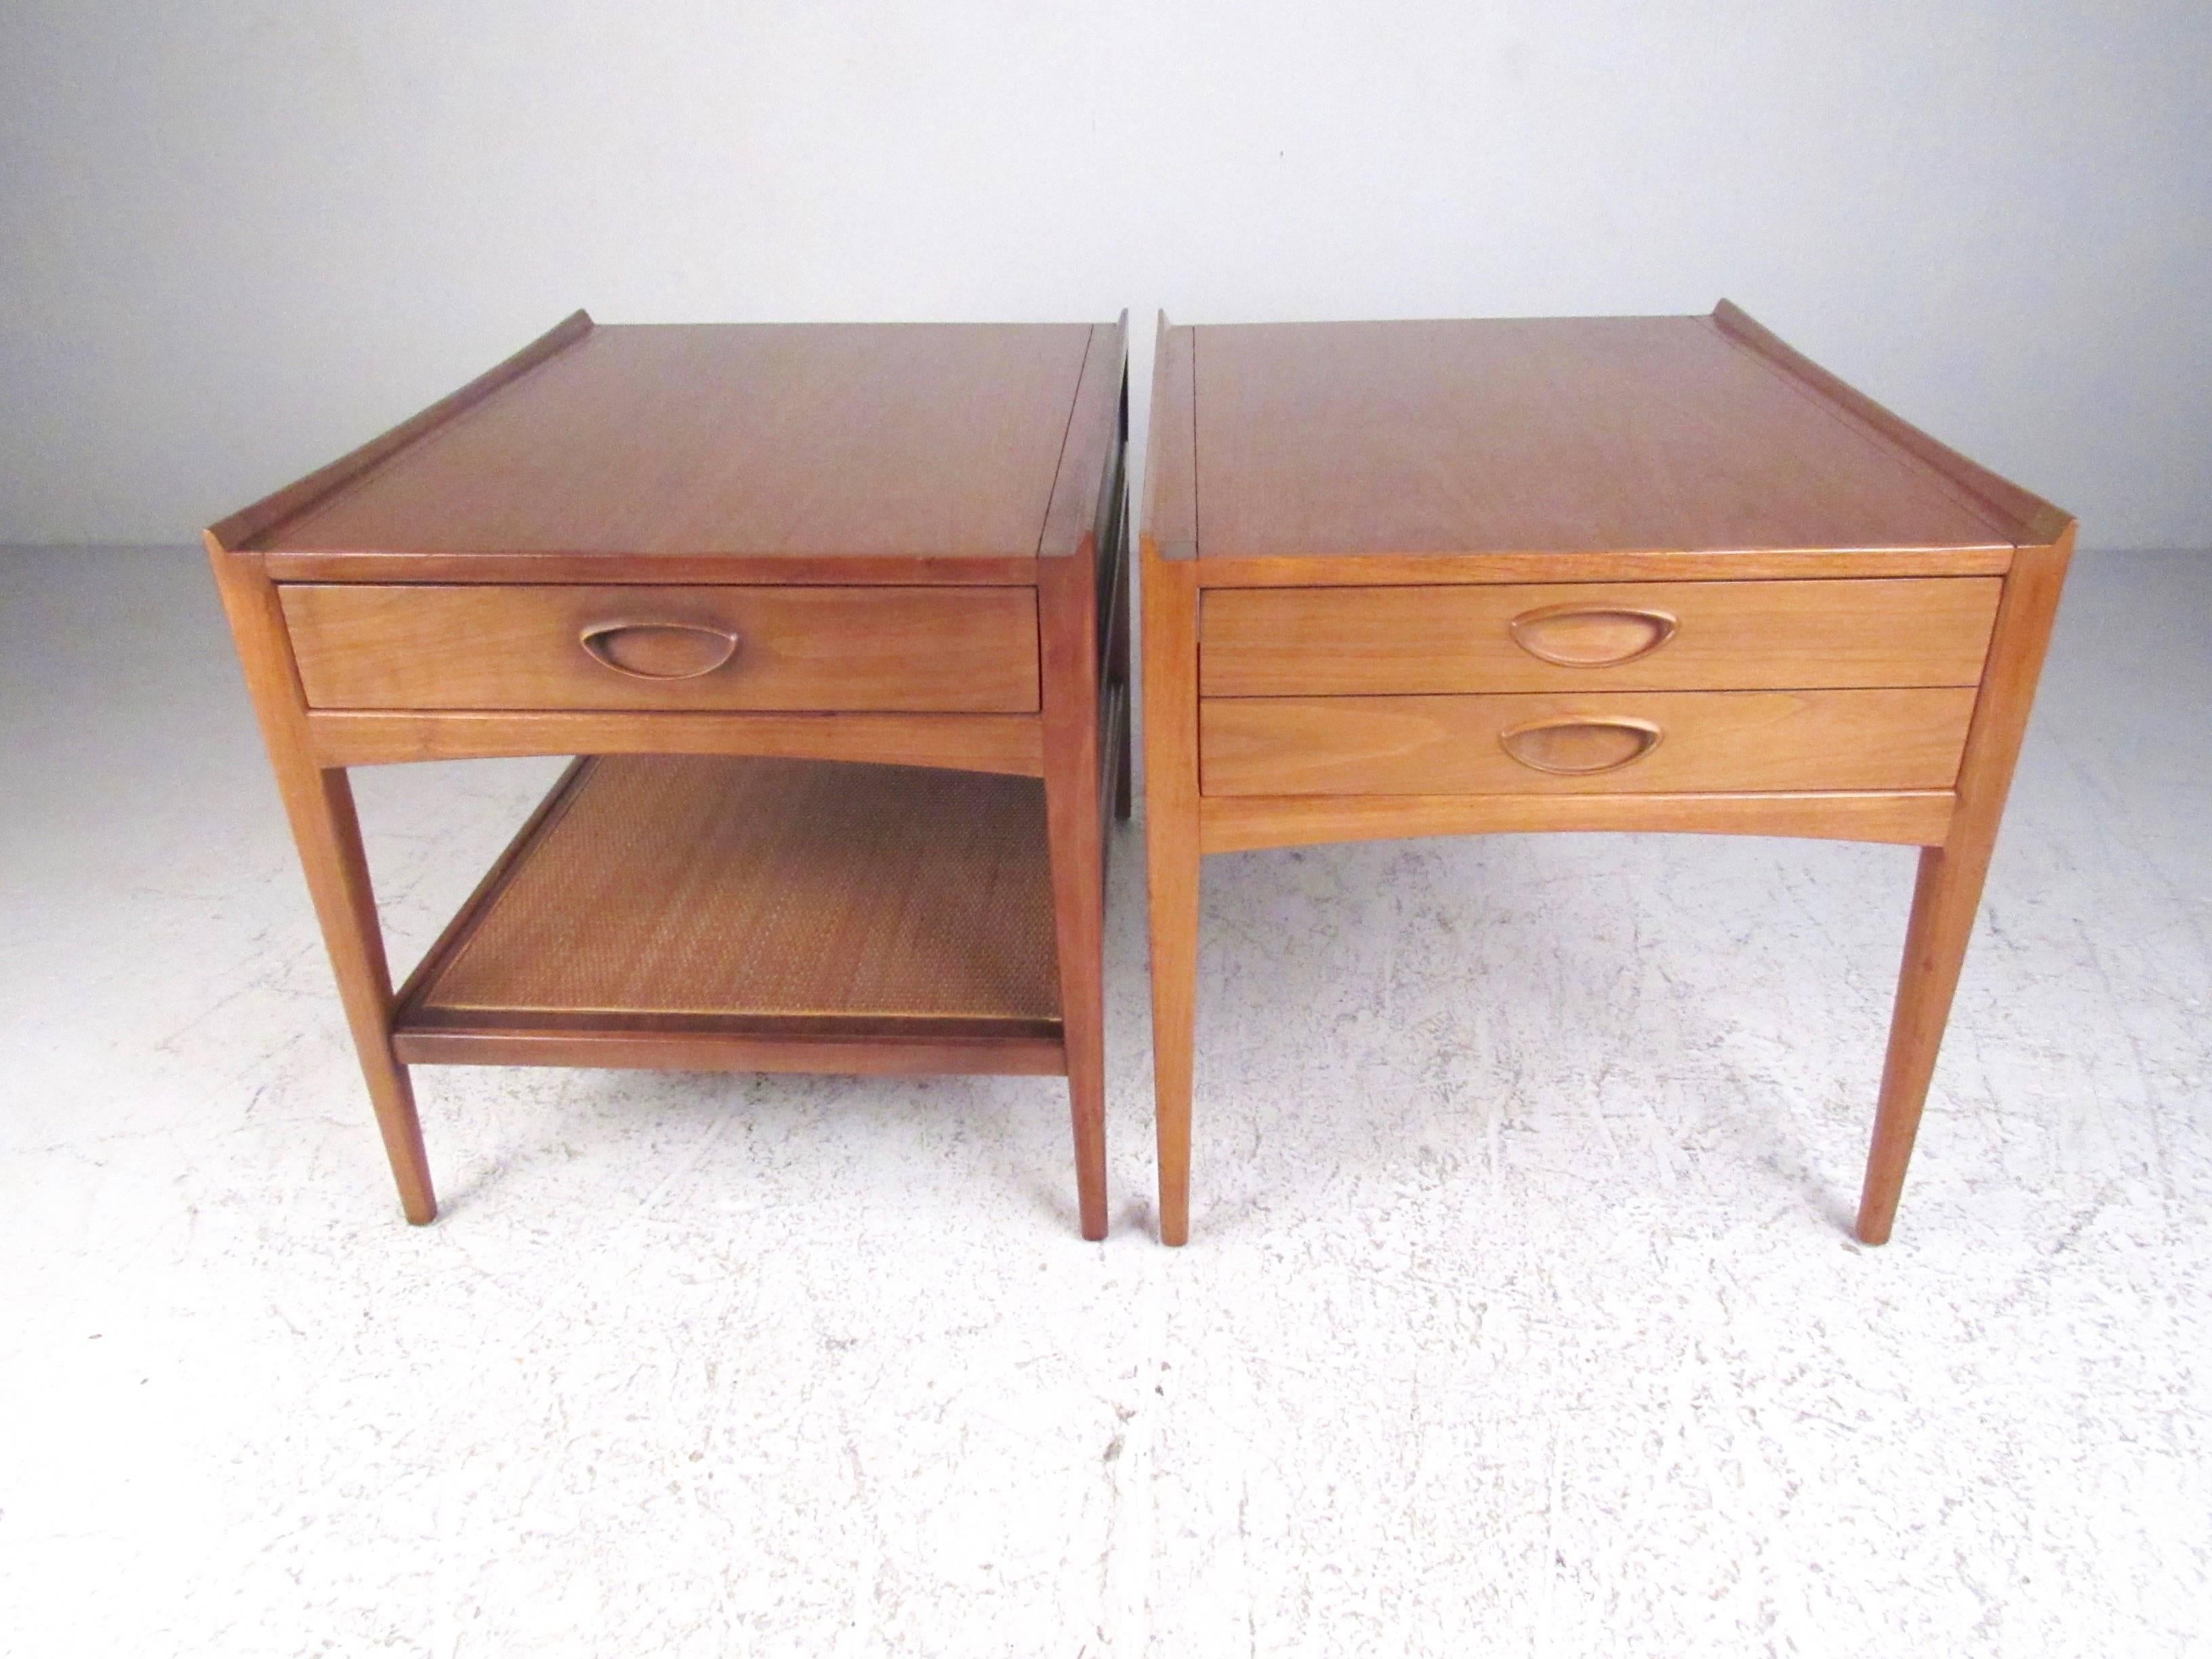 This stylish pair of vintage walnut end tables feature raised edge tops, cane storage shelf, and spacious drawer for storage. Perfect tables for bedside nightstands or living room end tables. Unique Mid-Century style includes rich natural wood